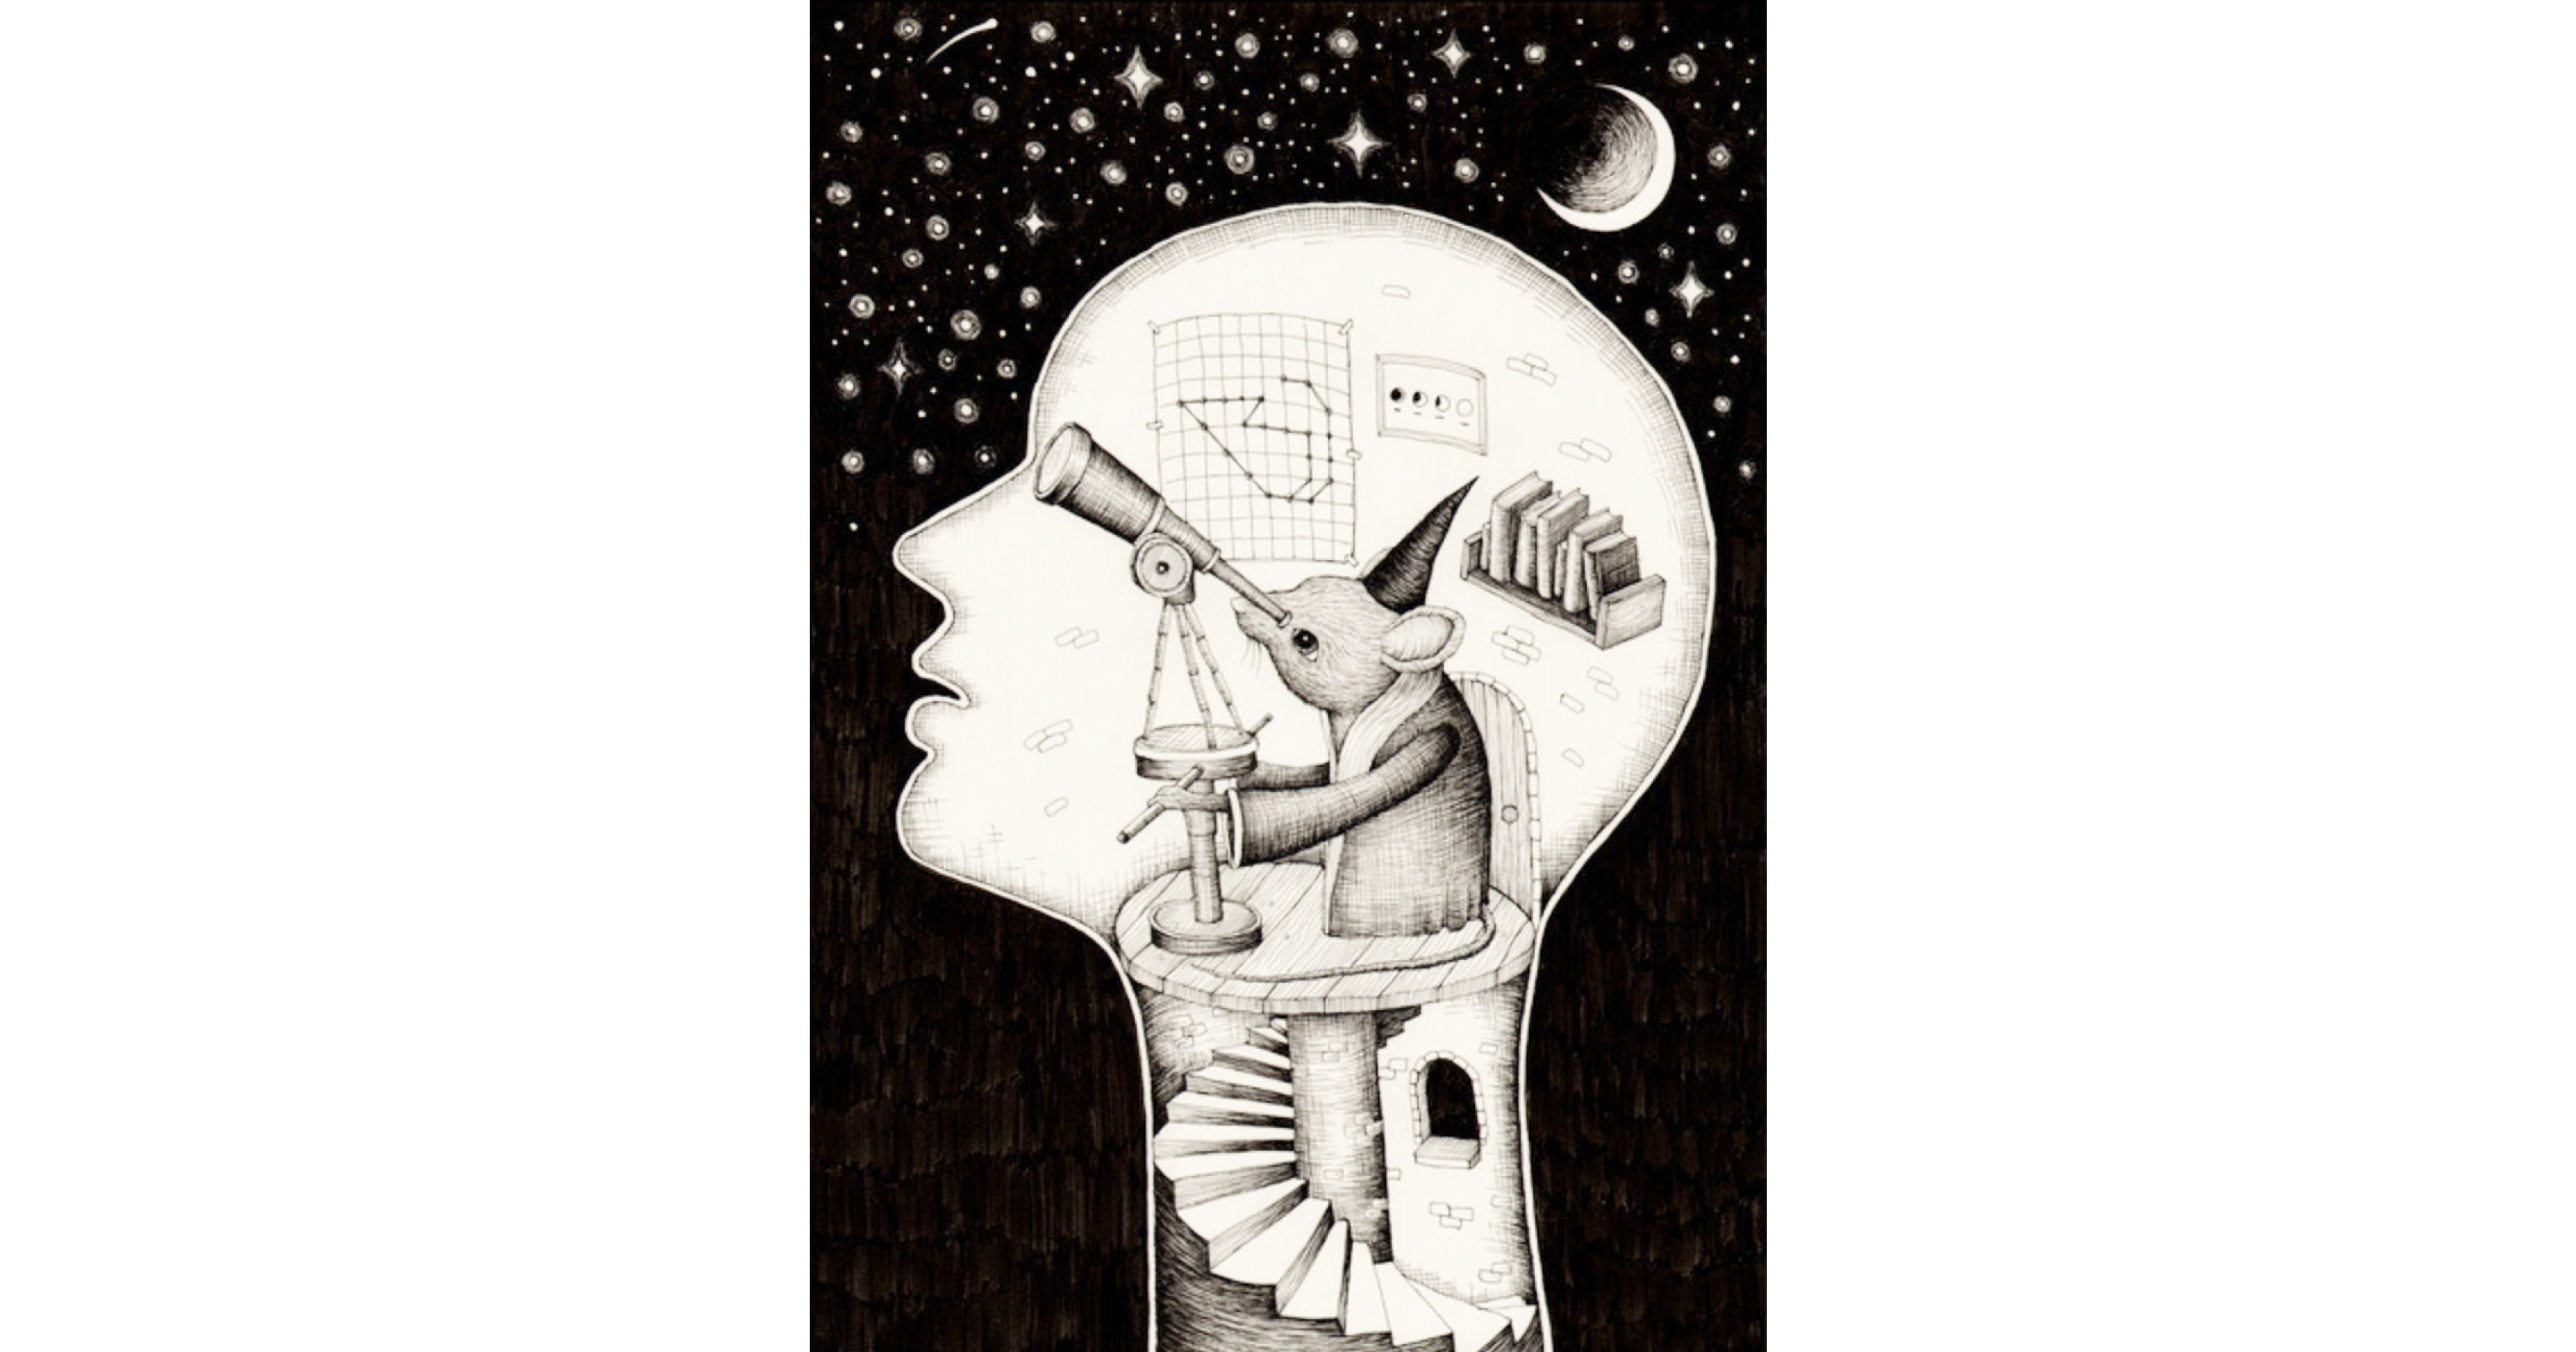 Man with a transparent head, and instead of a brain, there's an astronomer-mouse with a telescope looking through the man's eyes